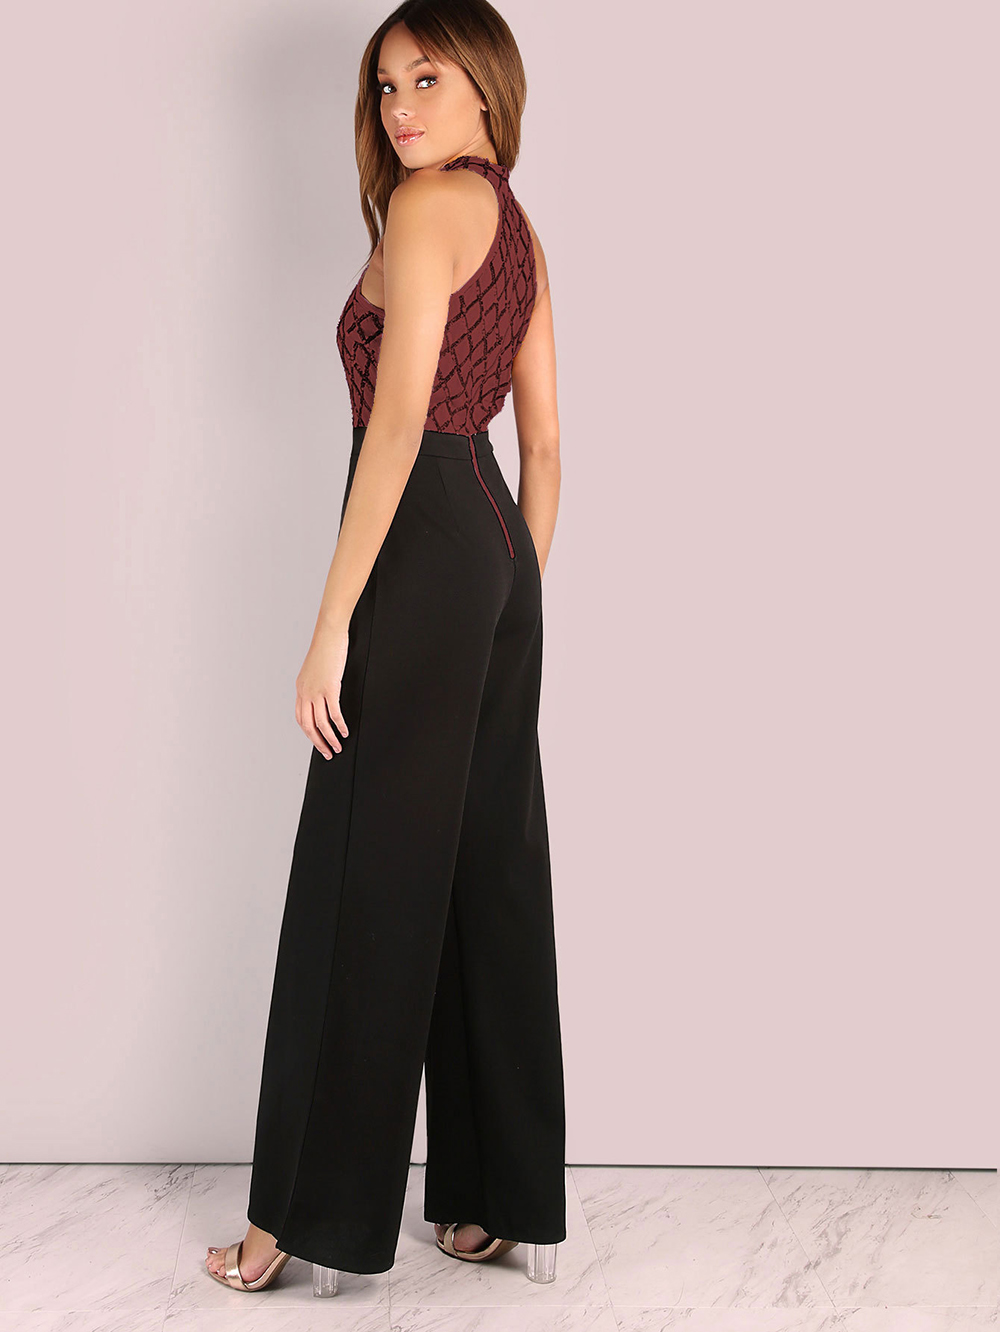 Sexy Sequined Stitching Sleeveless Slim Jumpsuit Long Flared Pants